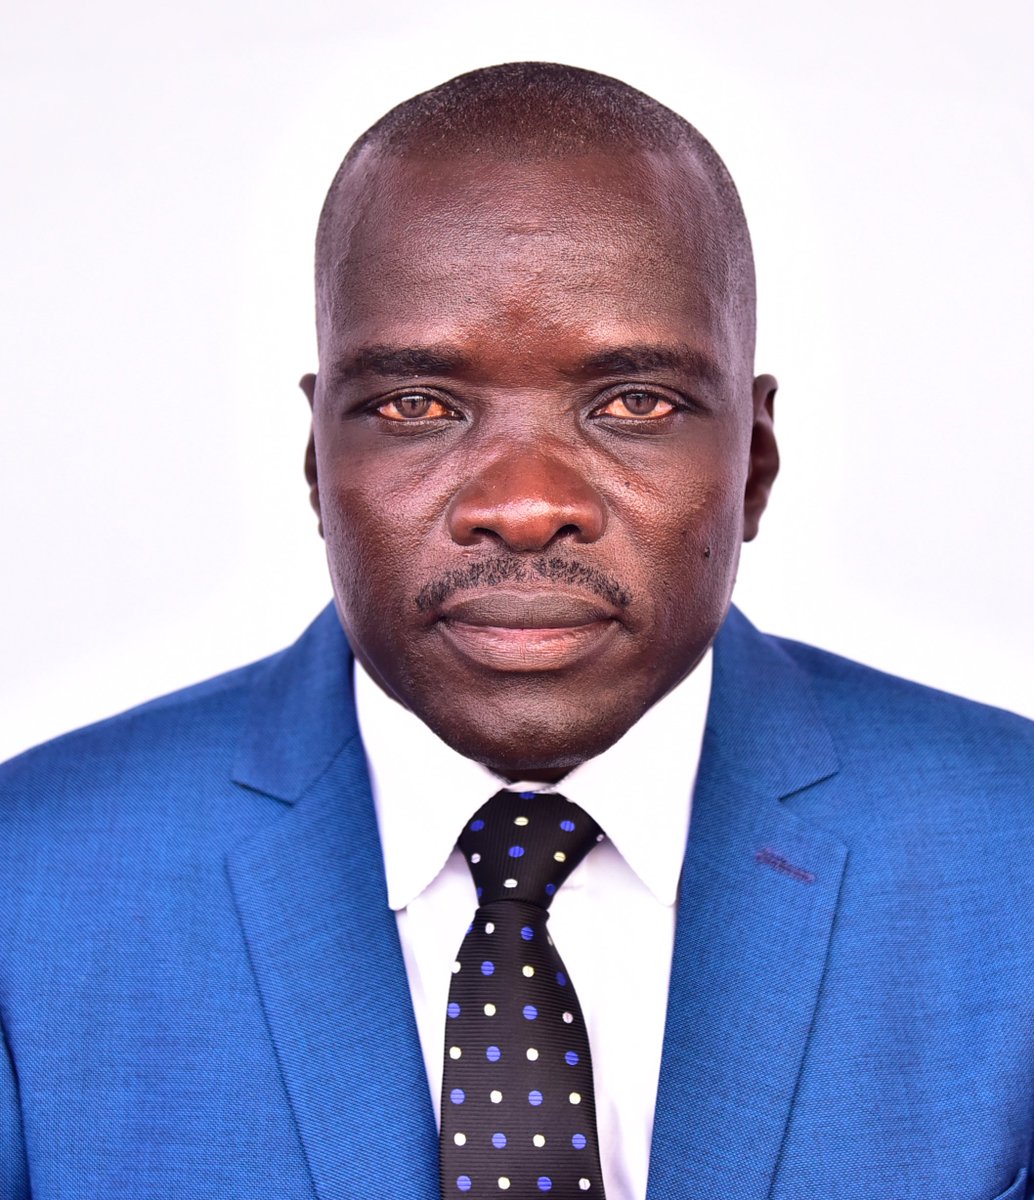 #KnowYourMP Name: Hon. Julius Tom Ekudo Constituency: Gweri County Profession: Social Worker Political Party: FDC #11thParliament